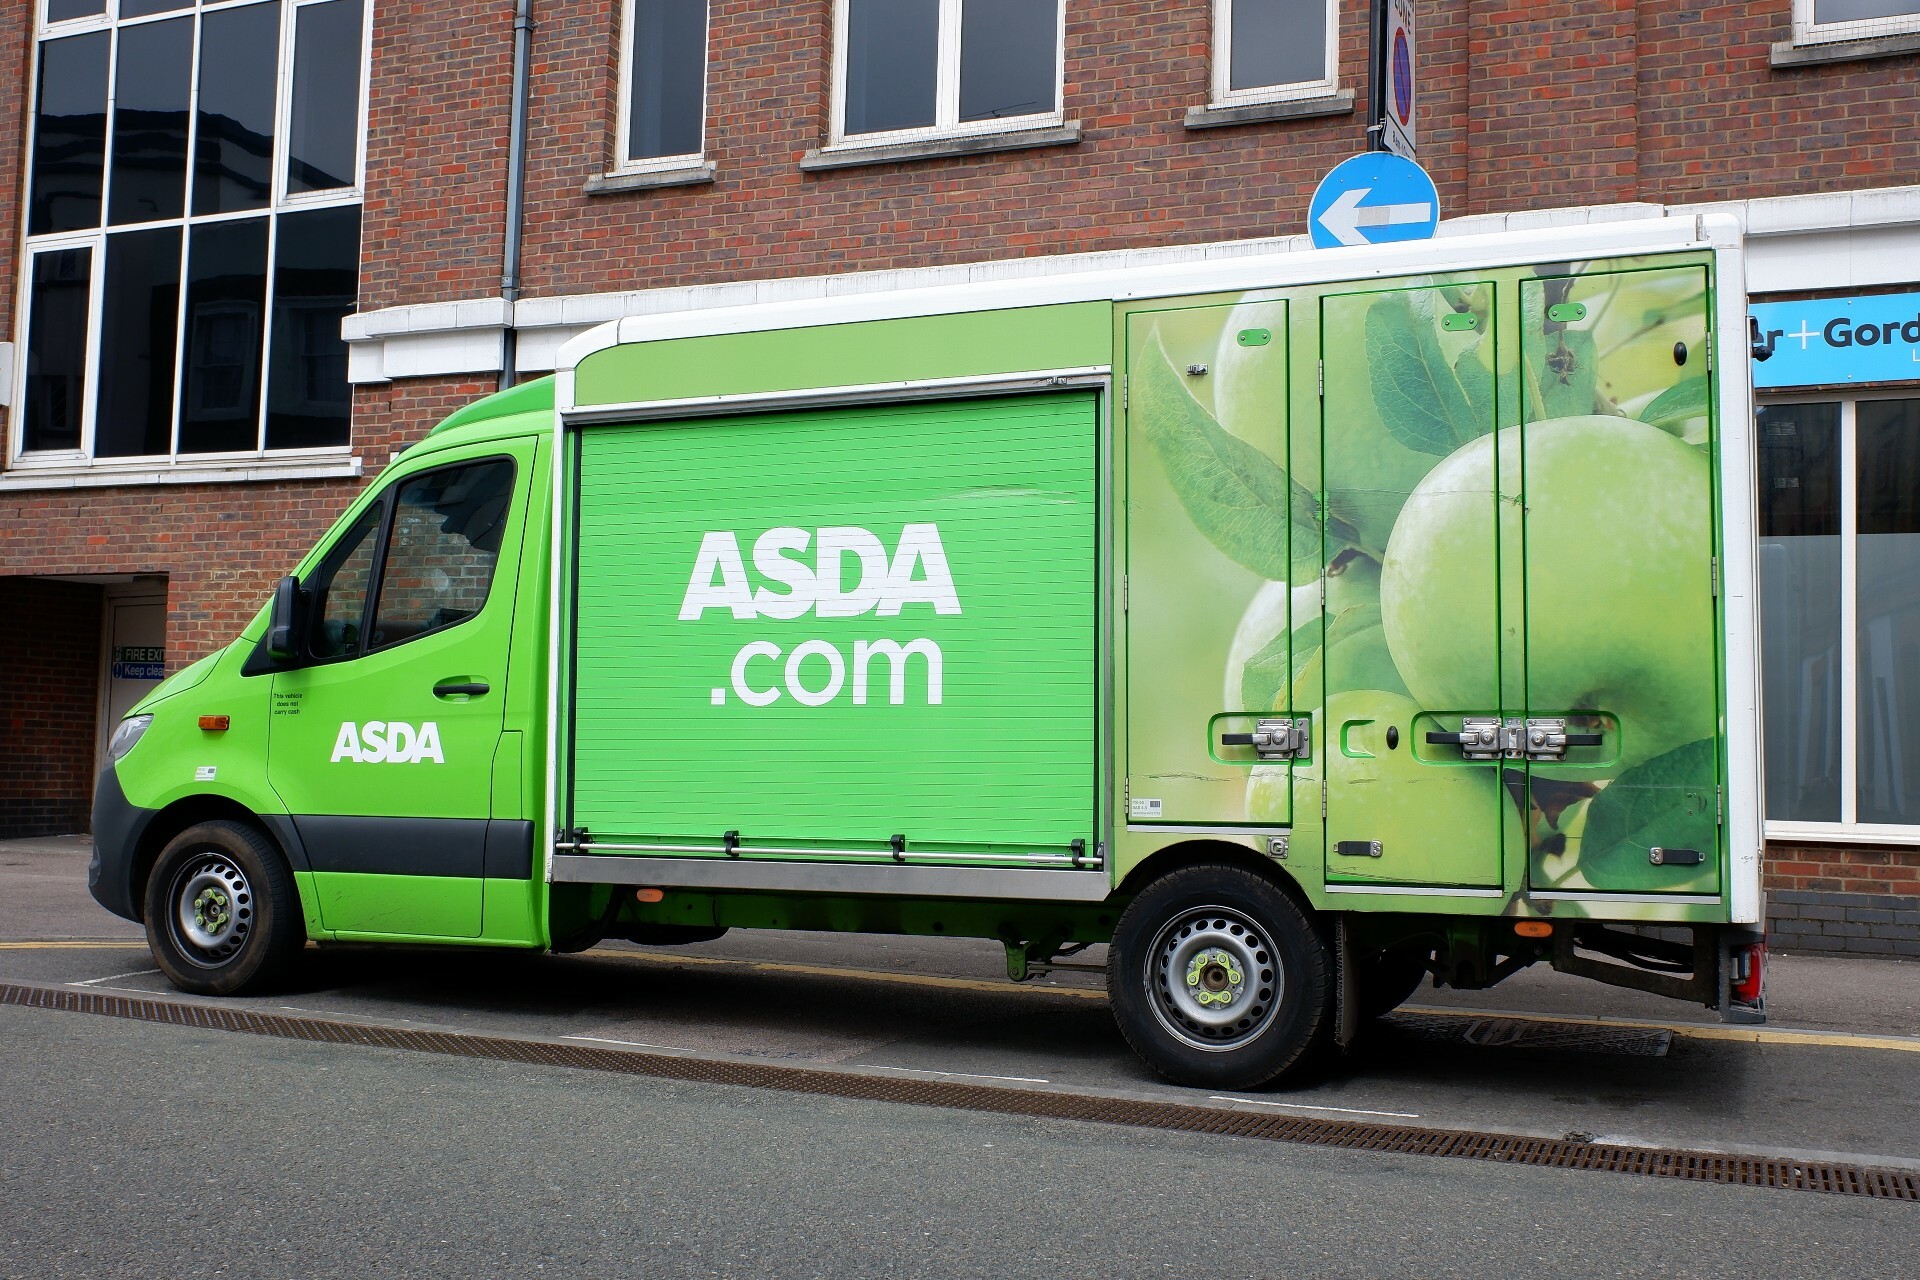 asda-has-launched-a-self-driving-car-delivery-service